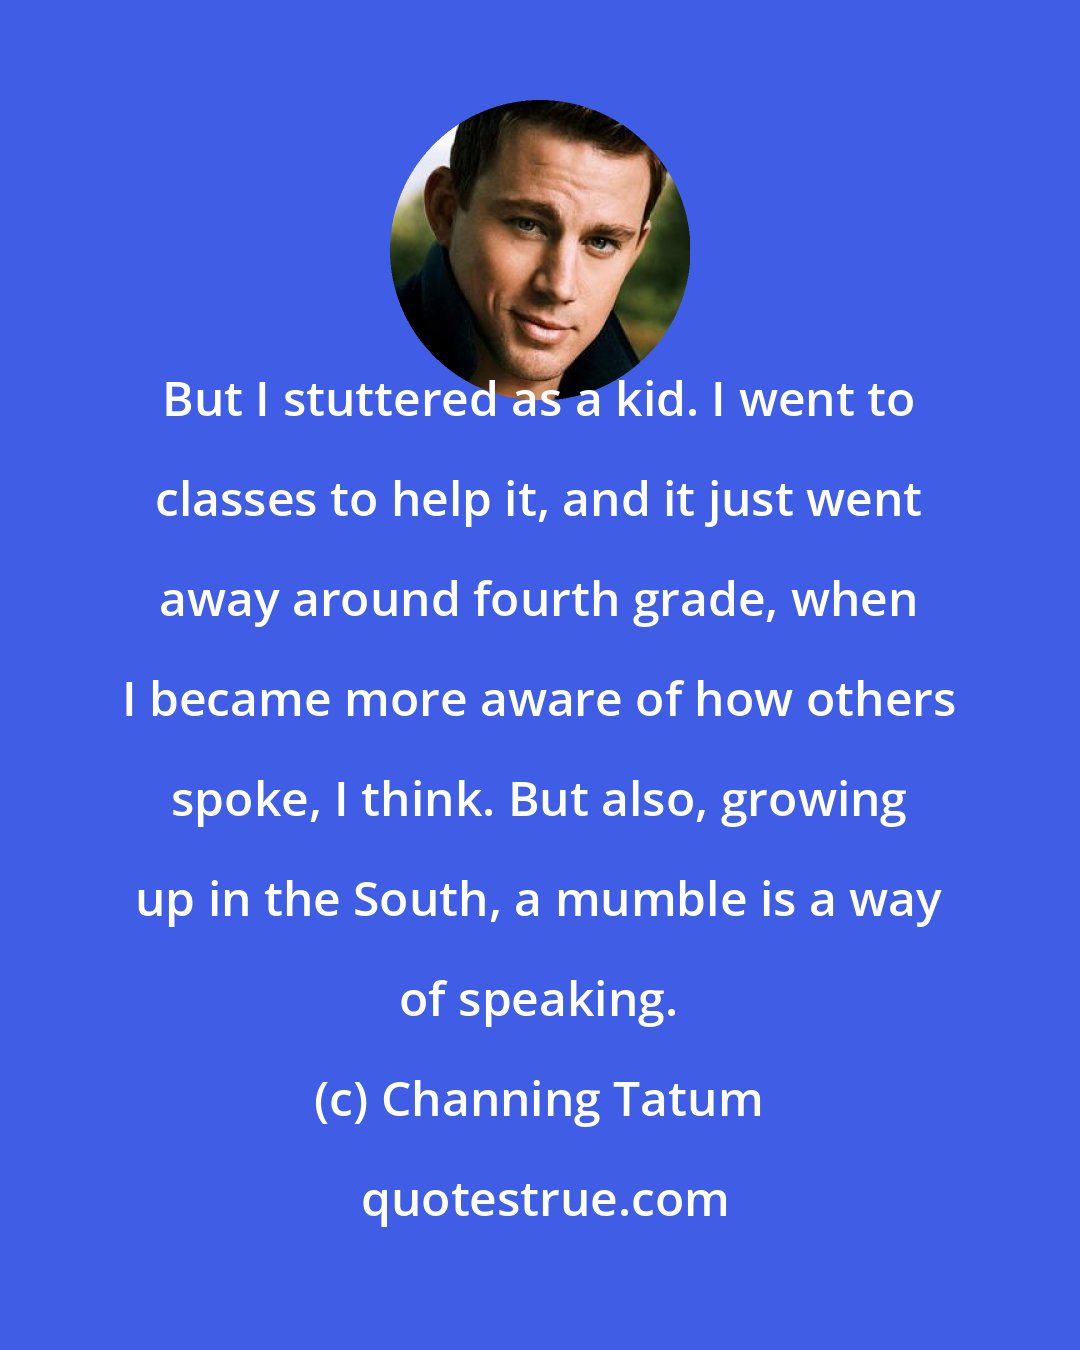 Channing Tatum: But I stuttered as a kid. I went to classes to help it, and it just went away around fourth grade, when I became more aware of how others spoke, I think. But also, growing up in the South, a mumble is a way of speaking.